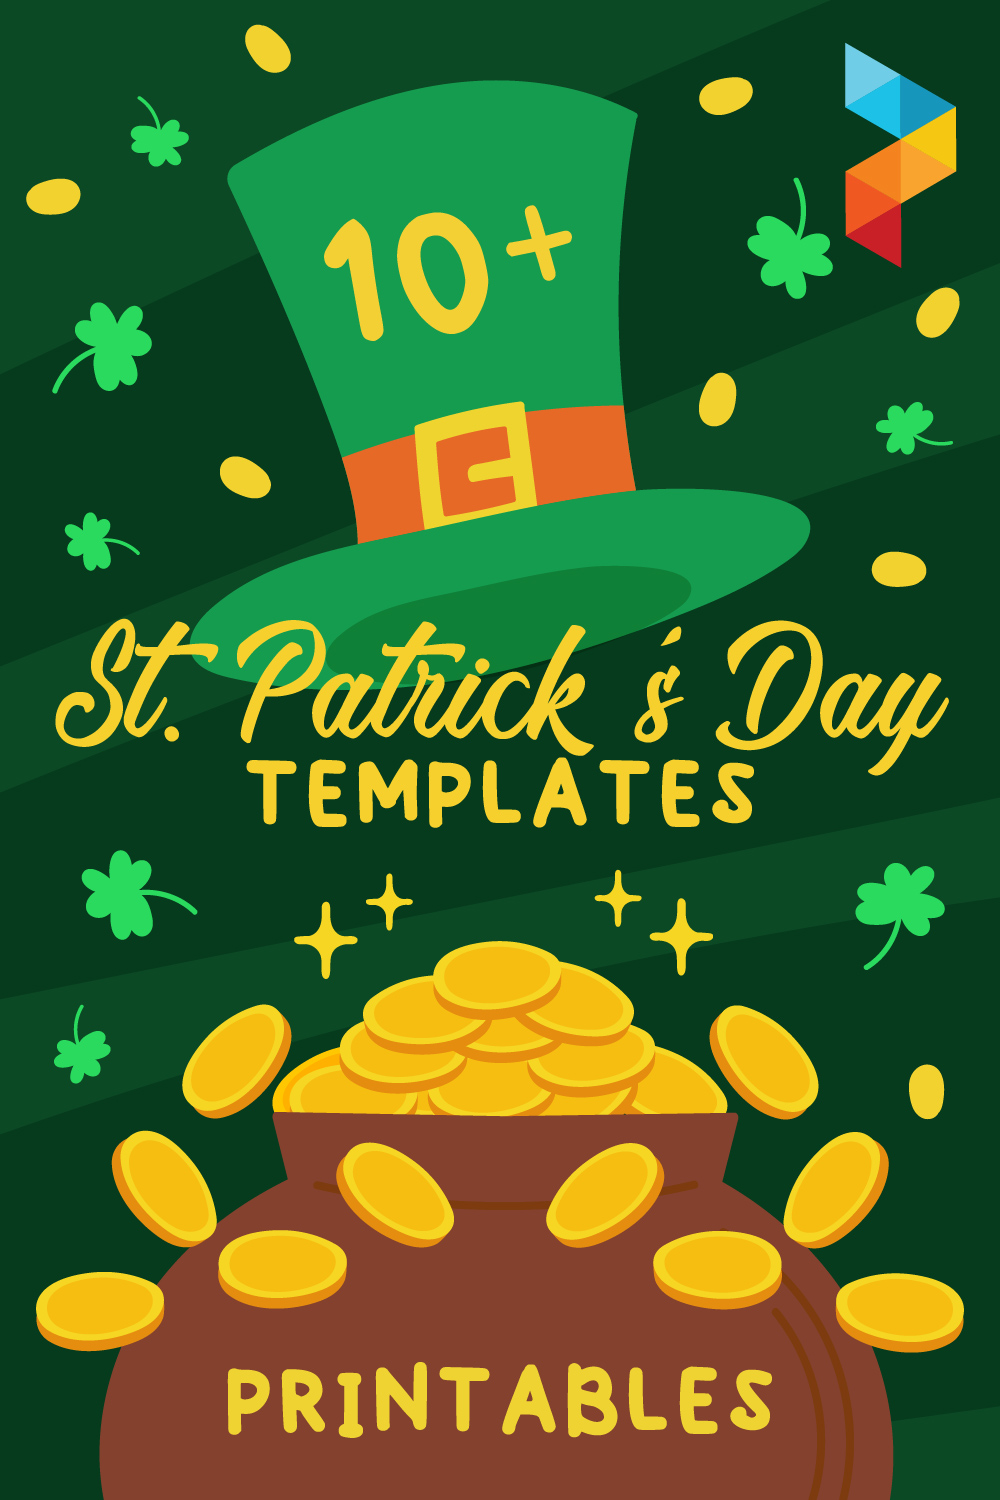 St Patrick's Day Templates